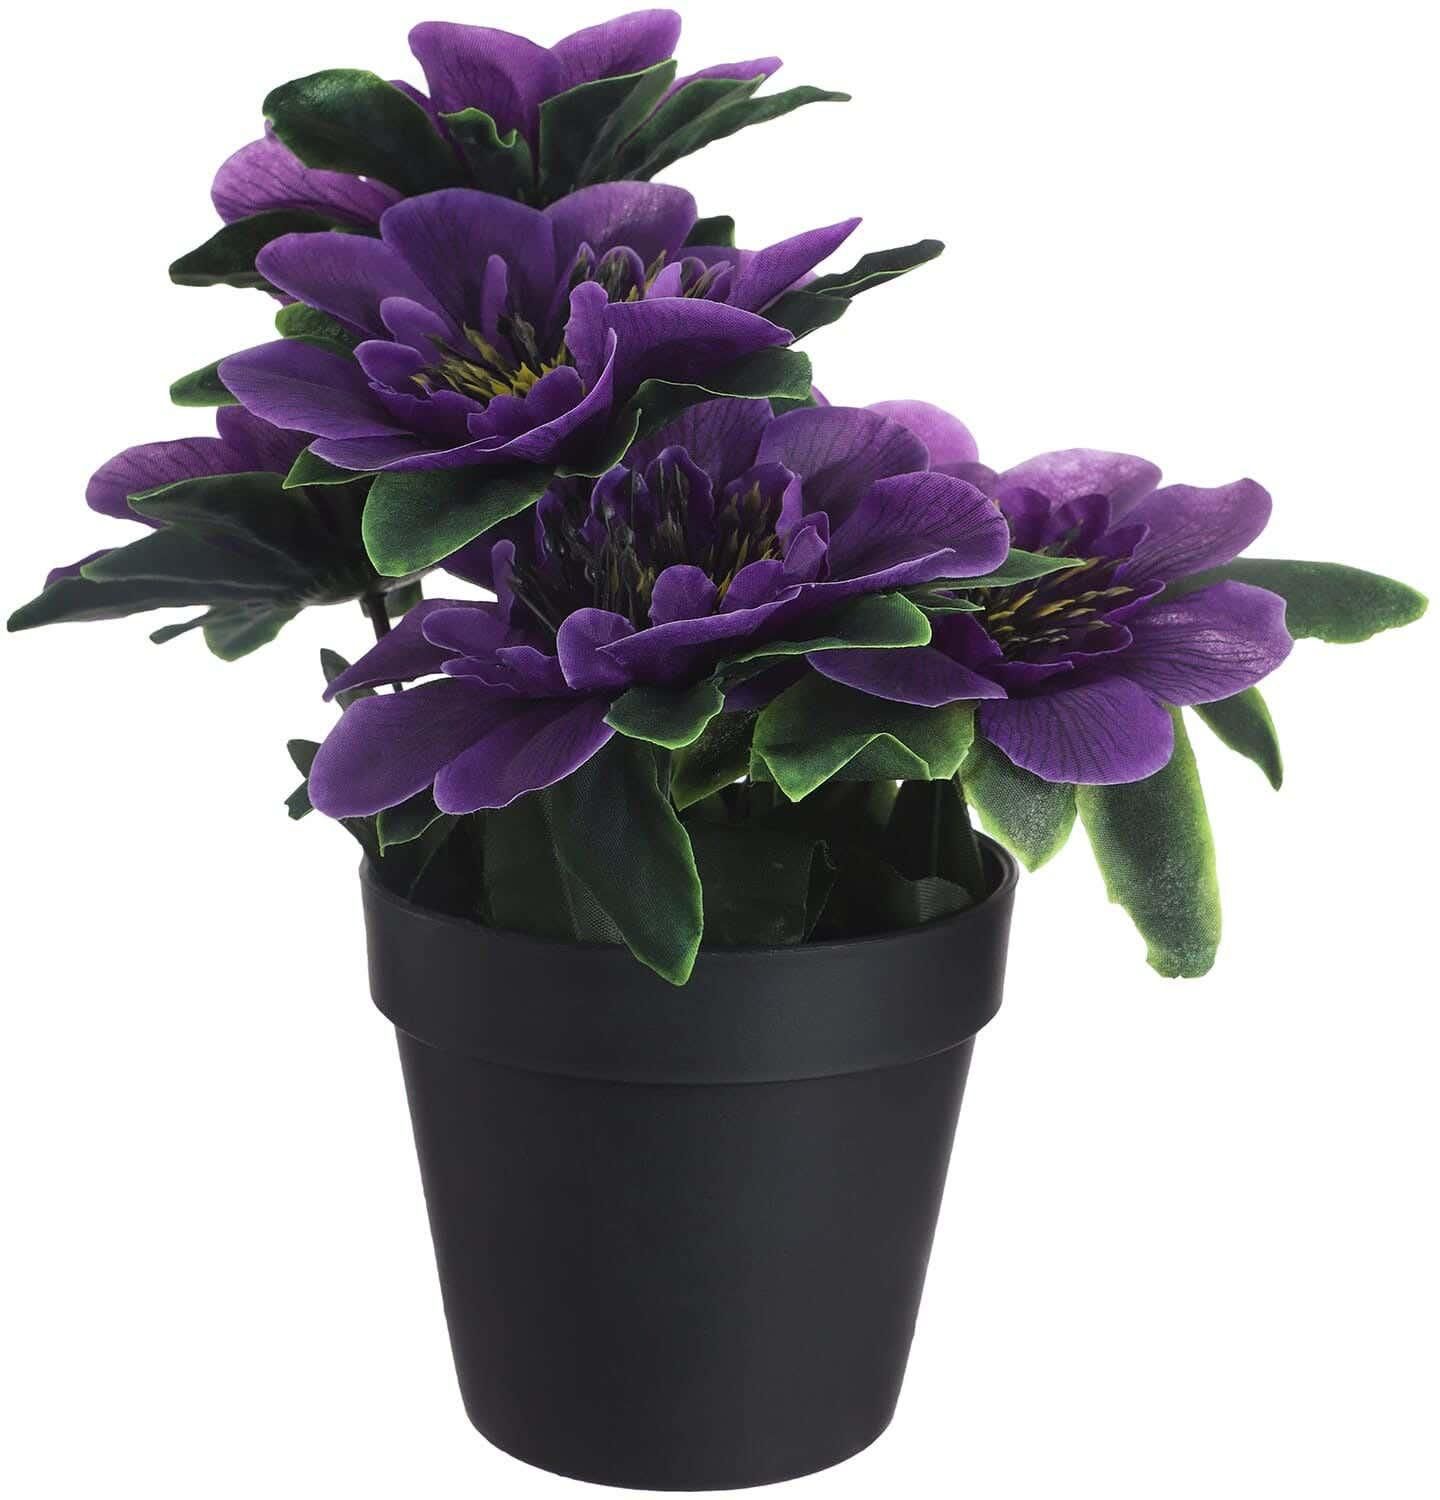 Get Plastic Round Vase With Flowers, 12 Cm - Purple with best offers | Raneen.com